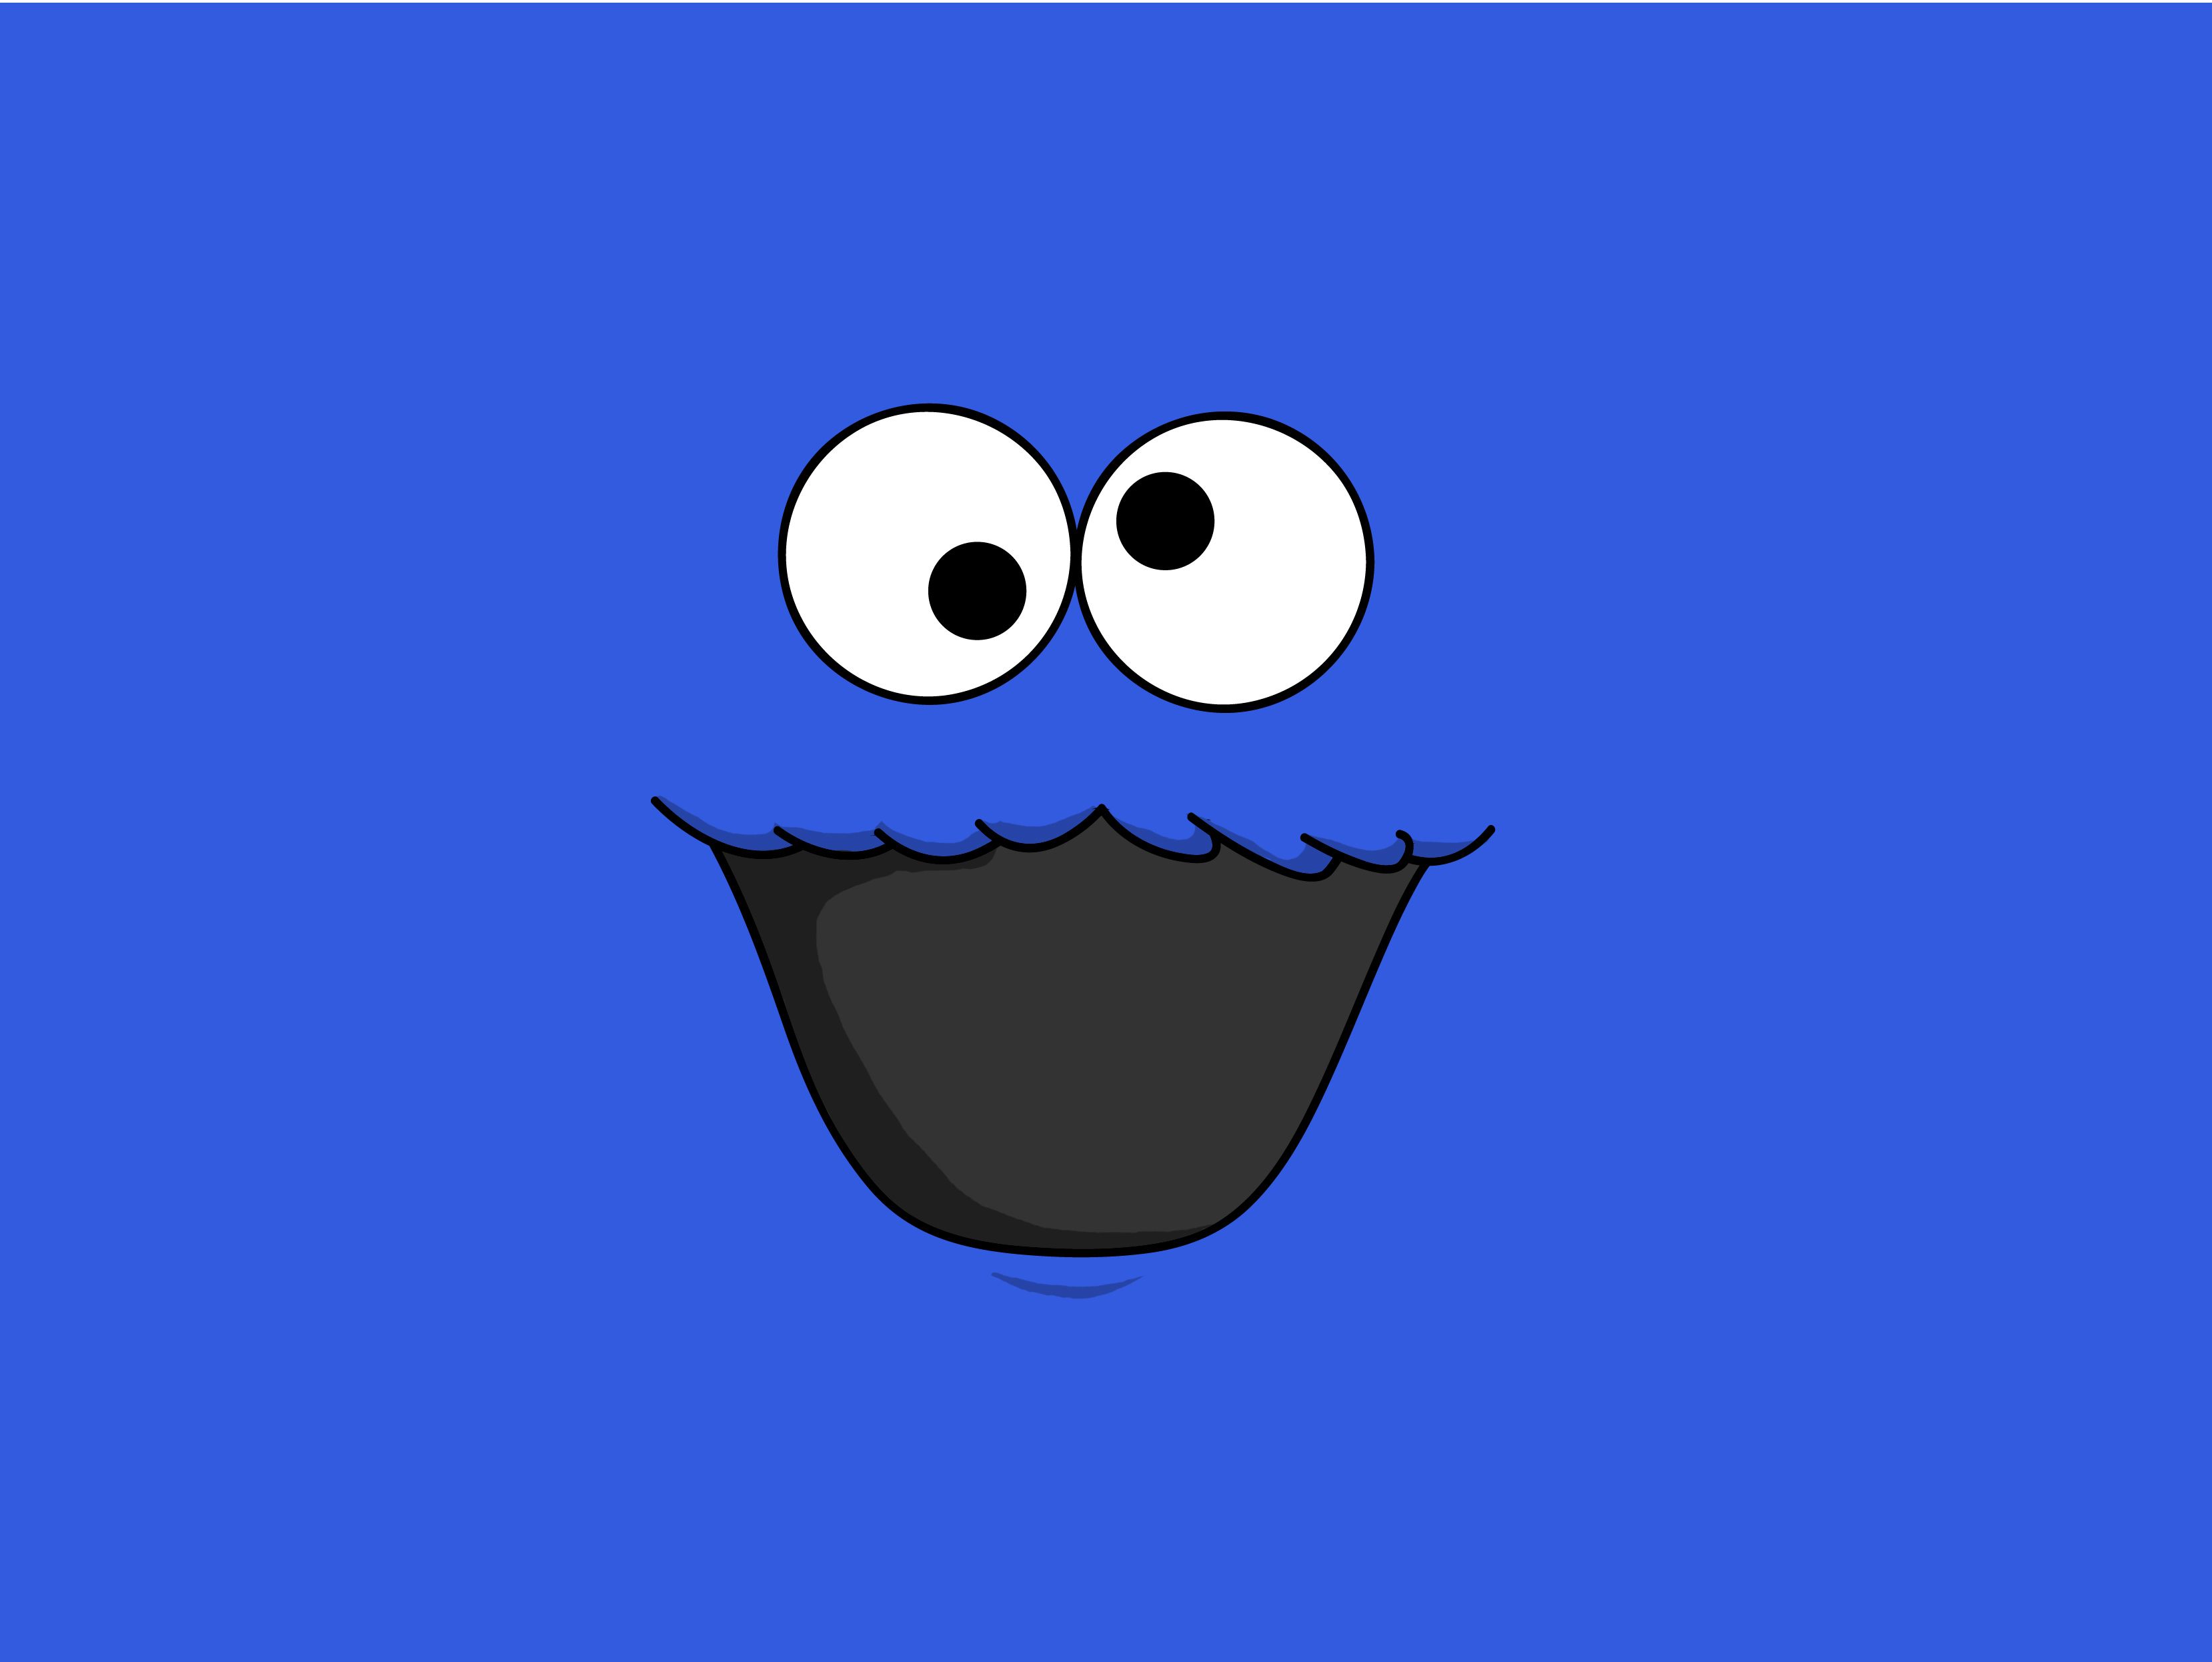 cookie monster wallpaper hd,blue,facial expression,cartoon,smile,azure